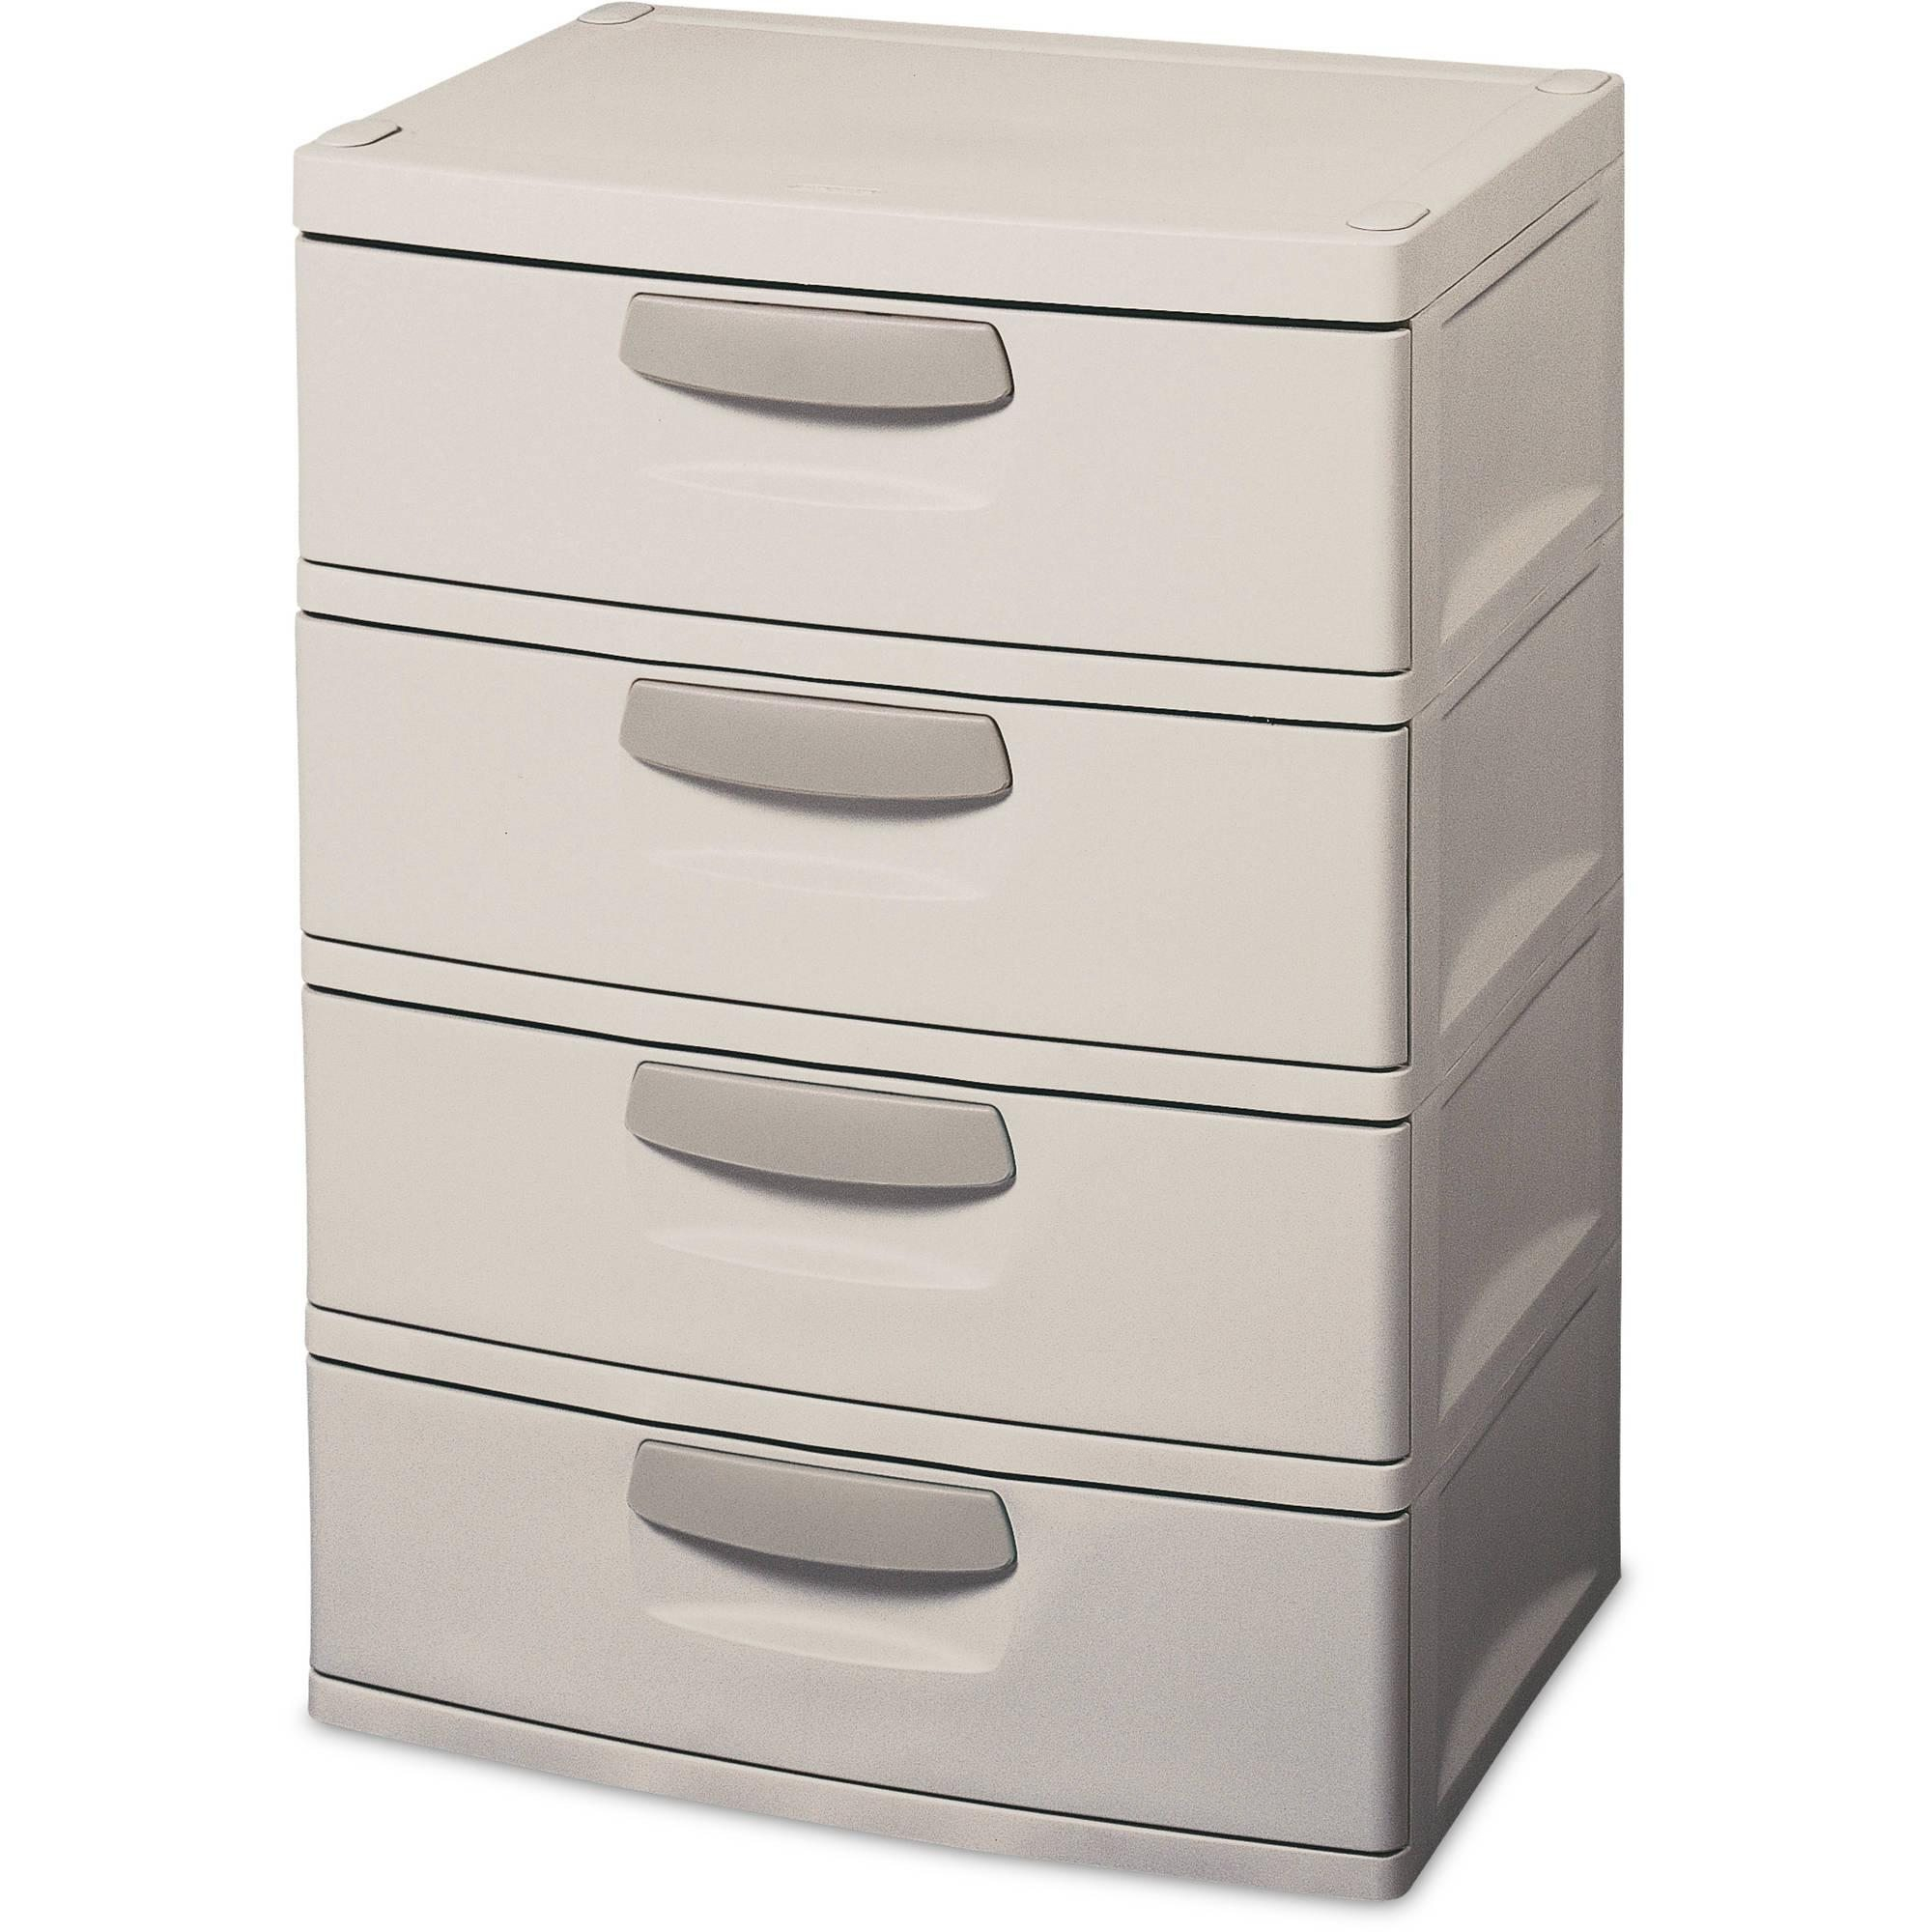 Furniture Rubbermaid Storage Cabinets For Garage Furniture Idea pertaining to size 2000 X 2000